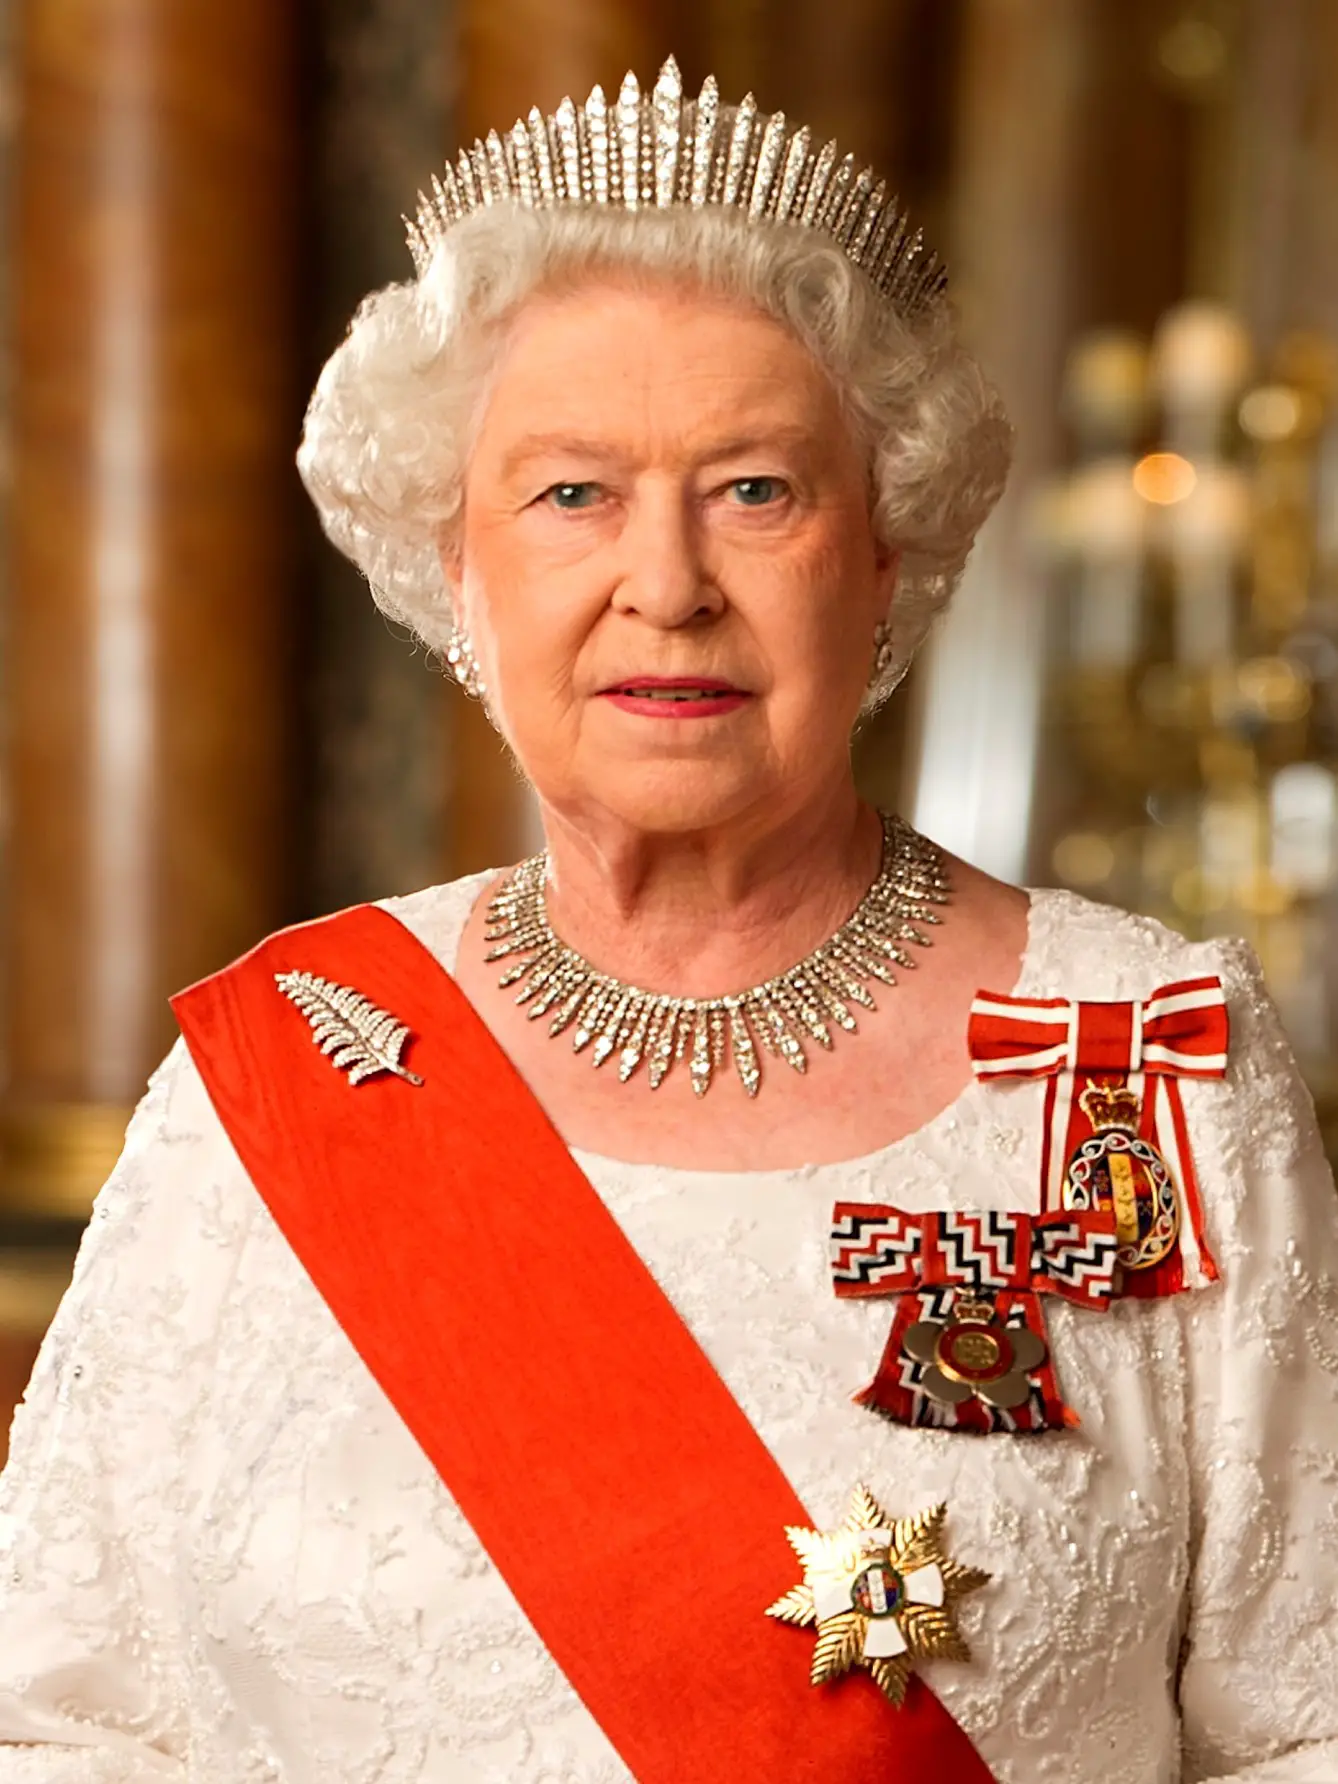 By Photograph taken by Julian Calder for Governor-General of New Zealand - Commonwealth Day Message from Her Majesty the Queen Elizabeth II, CC BY-SA 4.0, https://commons.wikimedia.org/w/index.php?curid=80337093